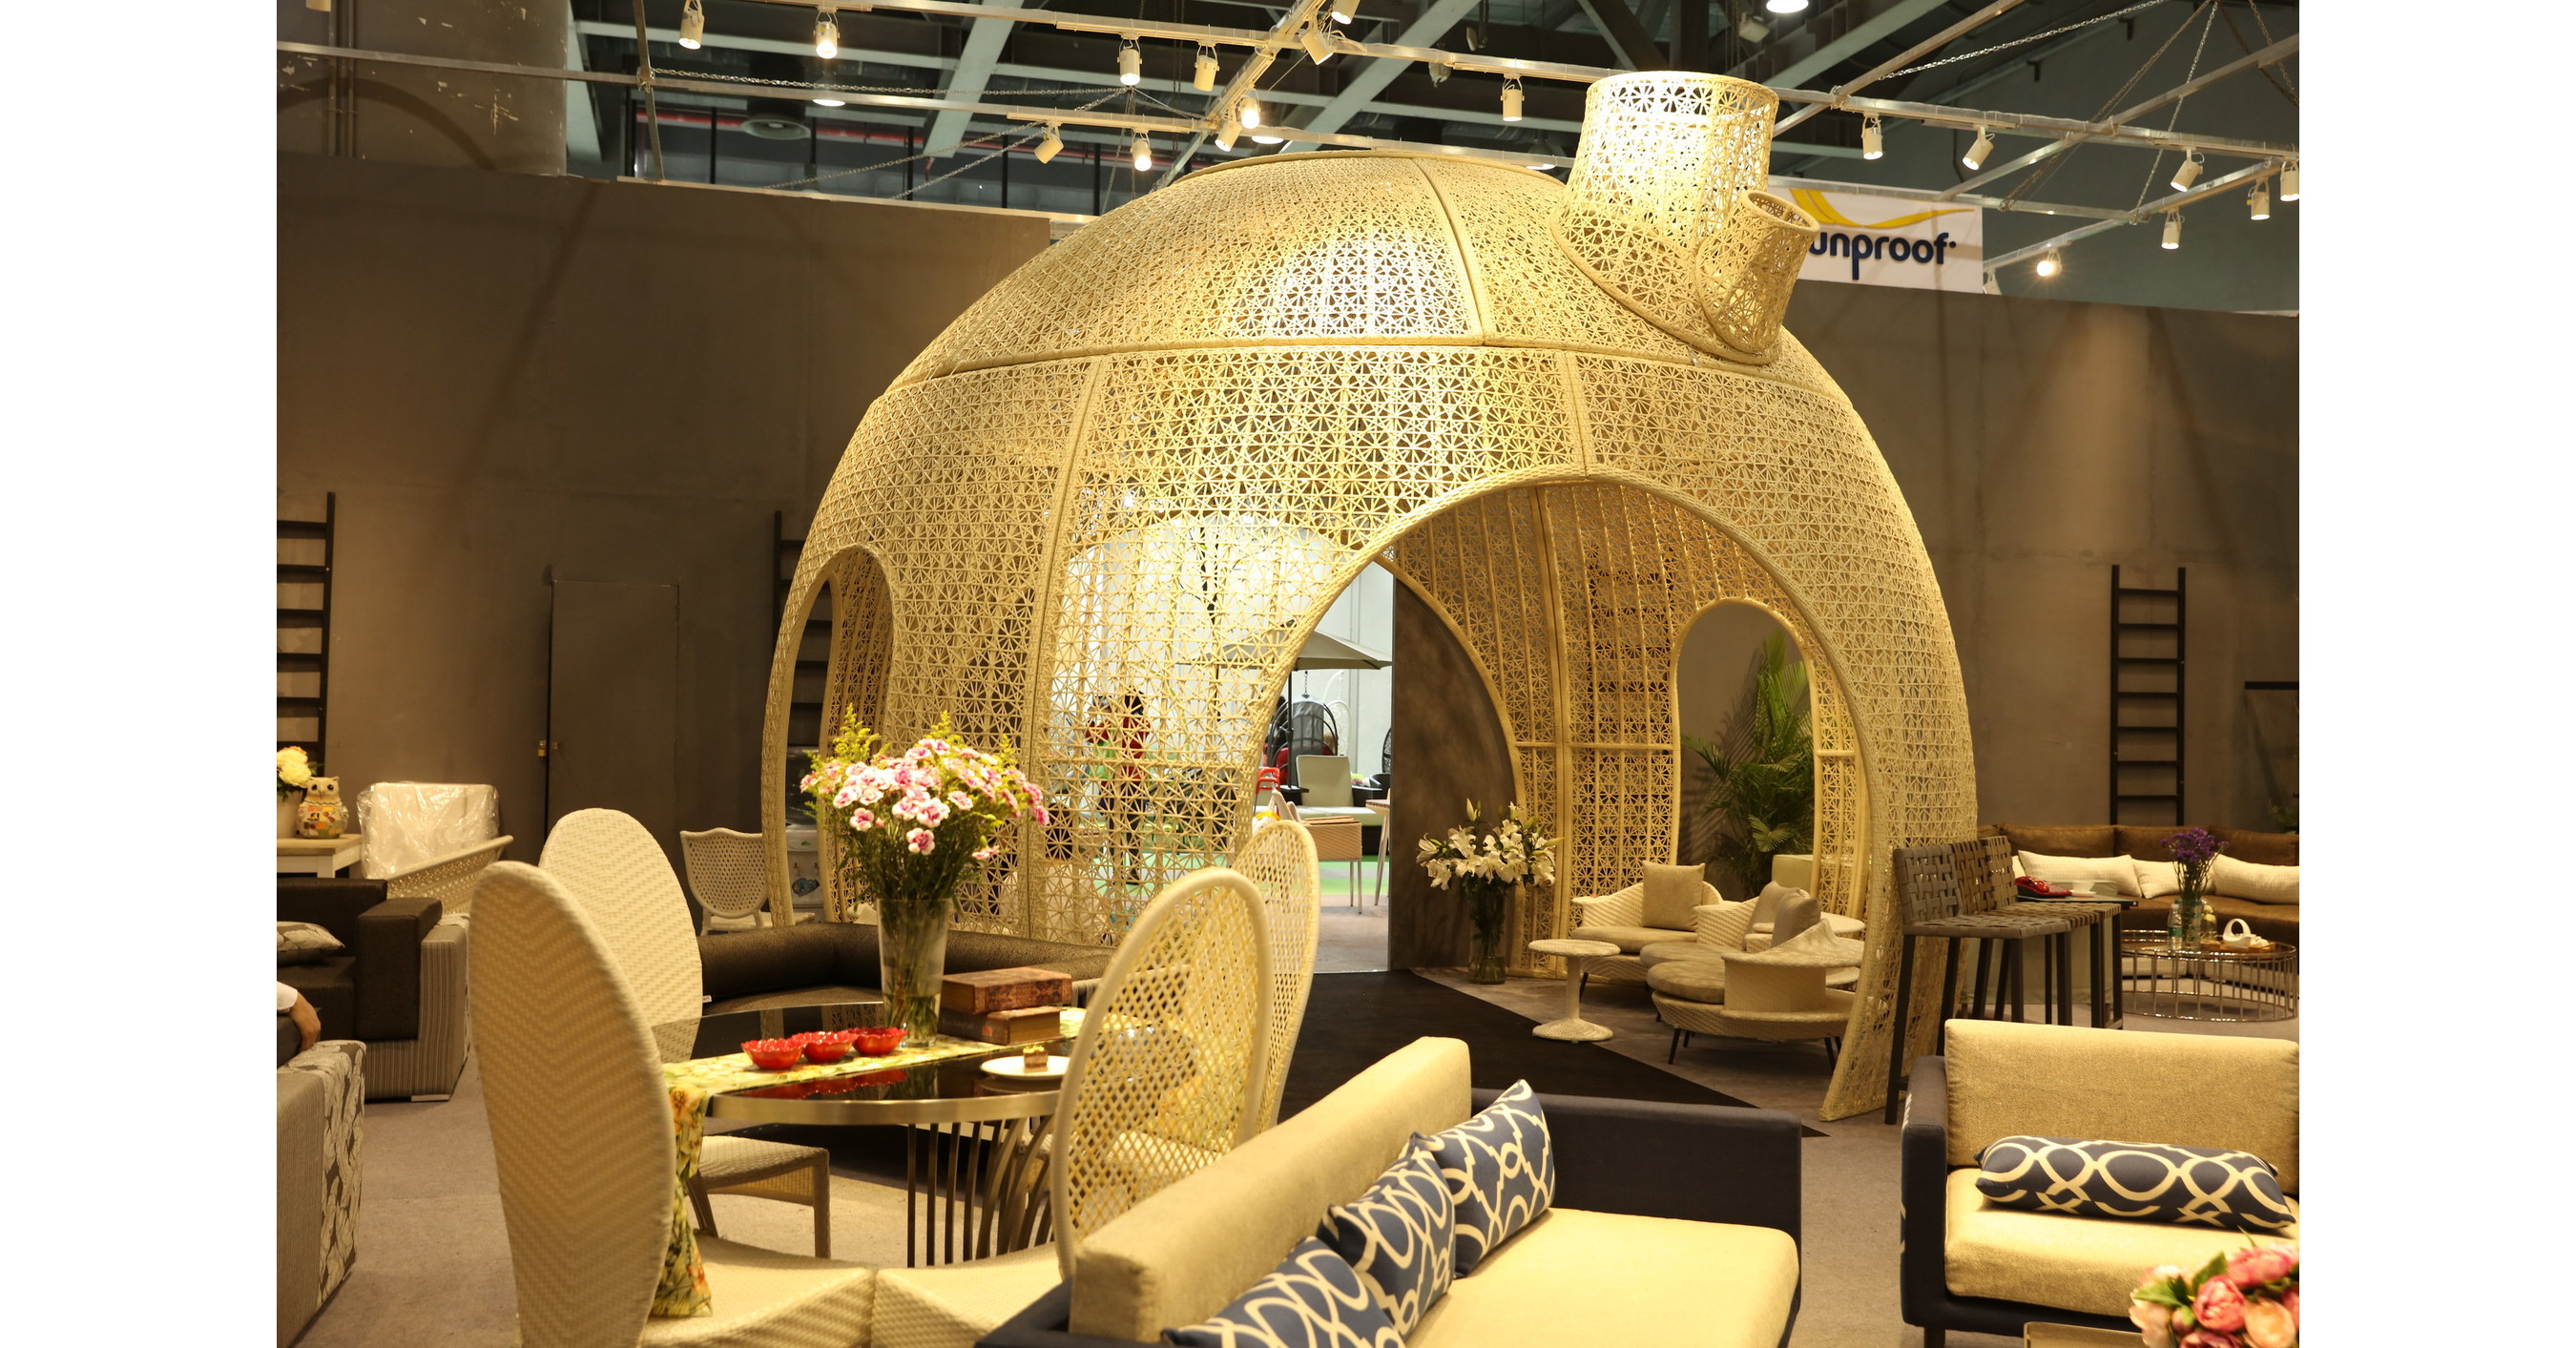 39th China International Furniture Fair Attracts Over 191,000 Visitors